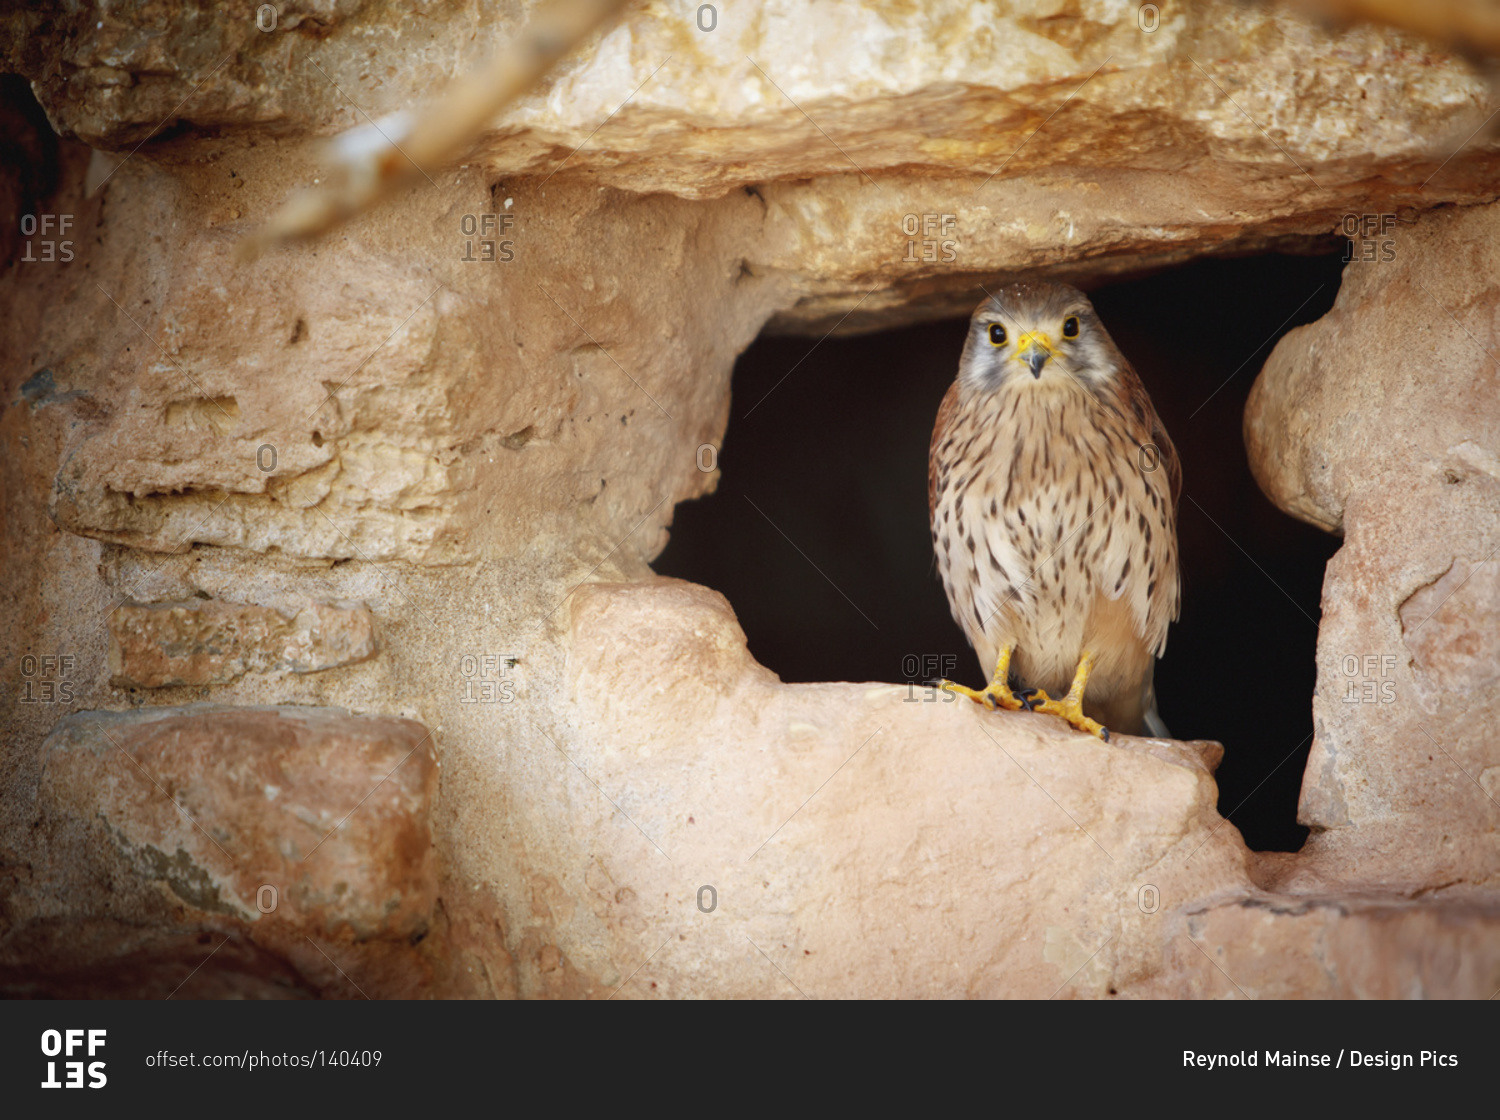 Bird perched in the opening of a cave, Israel